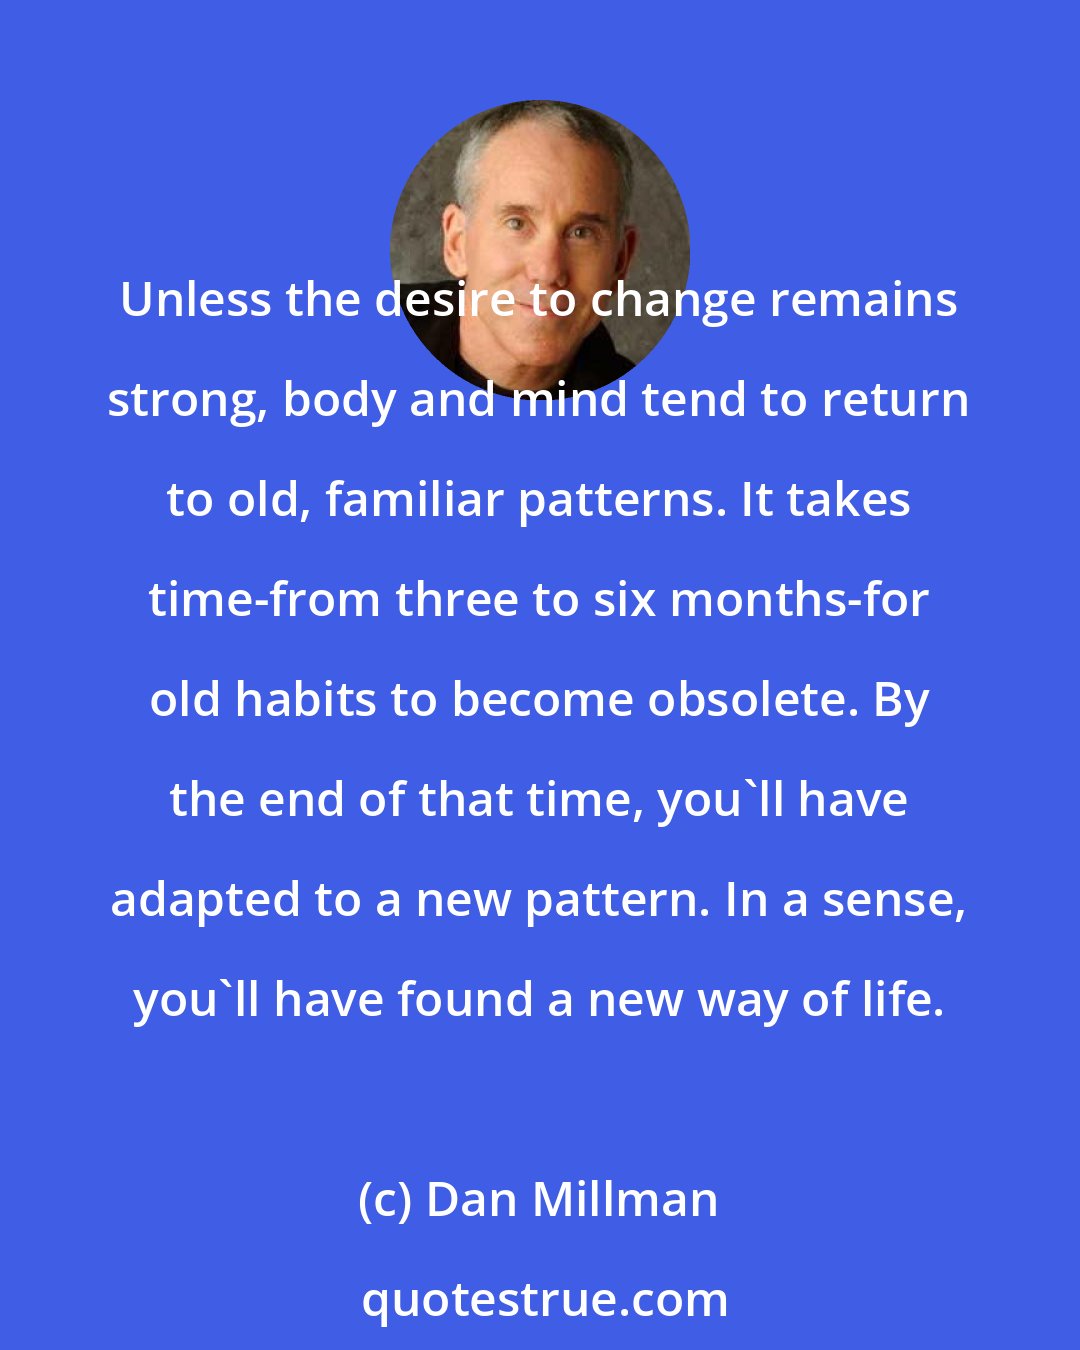 Dan Millman: Unless the desire to change remains strong, body and mind tend to return to old, familiar patterns. It takes time-from three to six months-for old habits to become obsolete. By the end of that time, you'll have adapted to a new pattern. In a sense, you'll have found a new way of life.